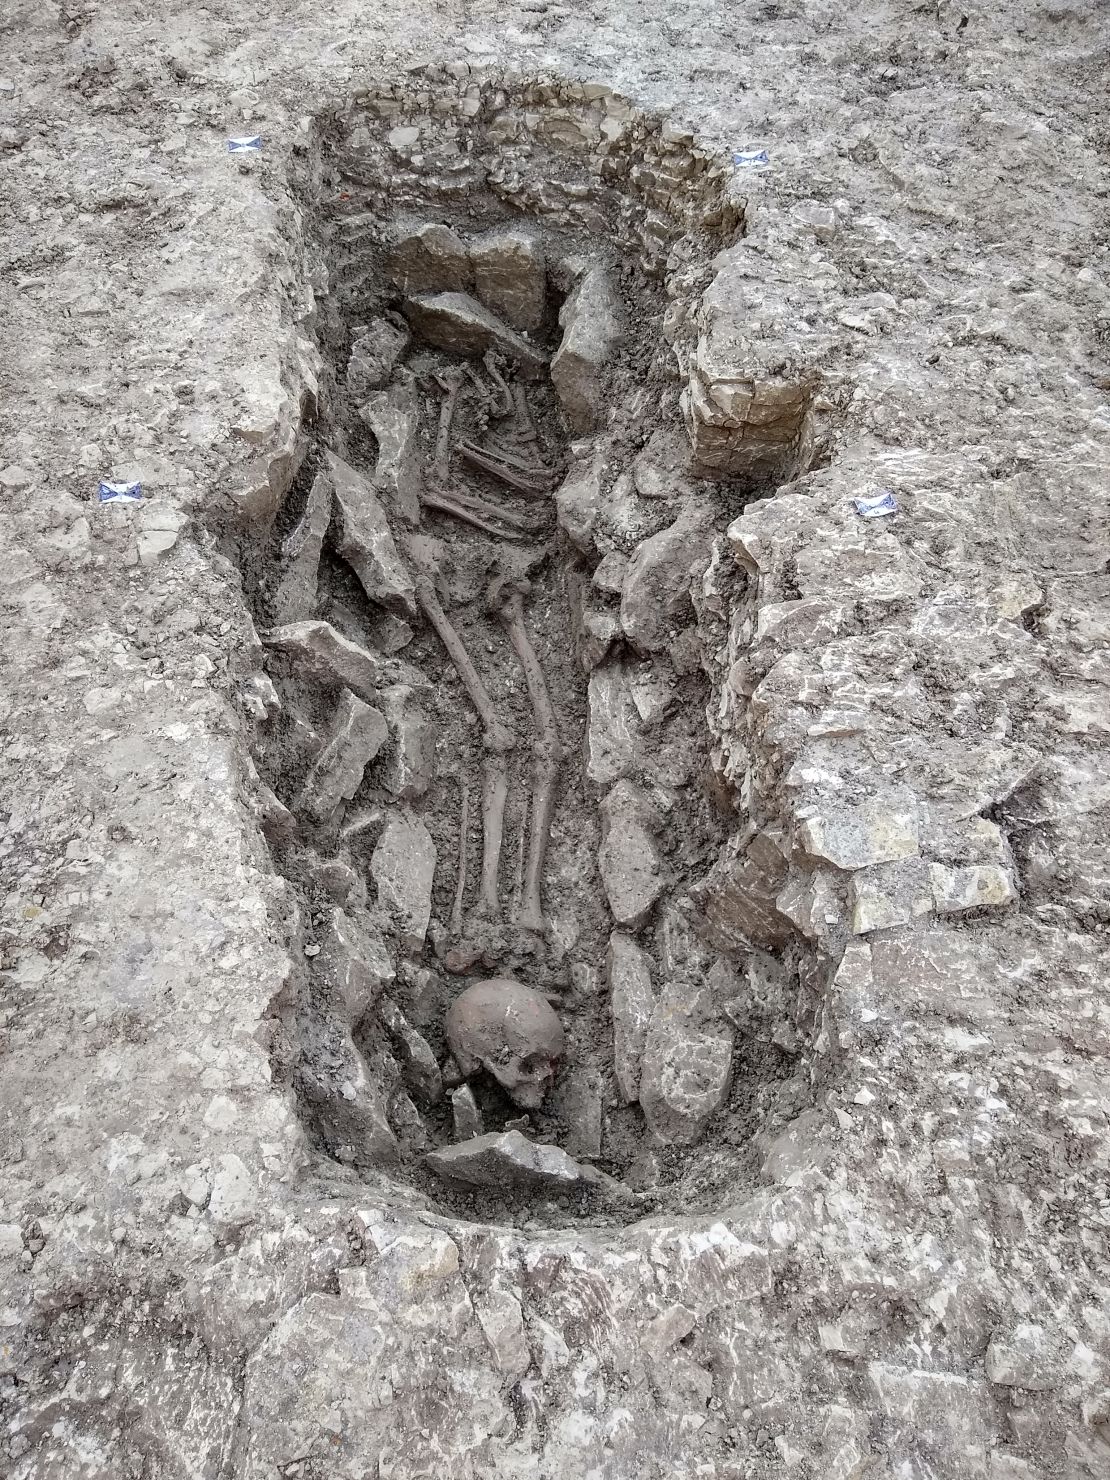 A skeleton found with its skull placed at its feet.